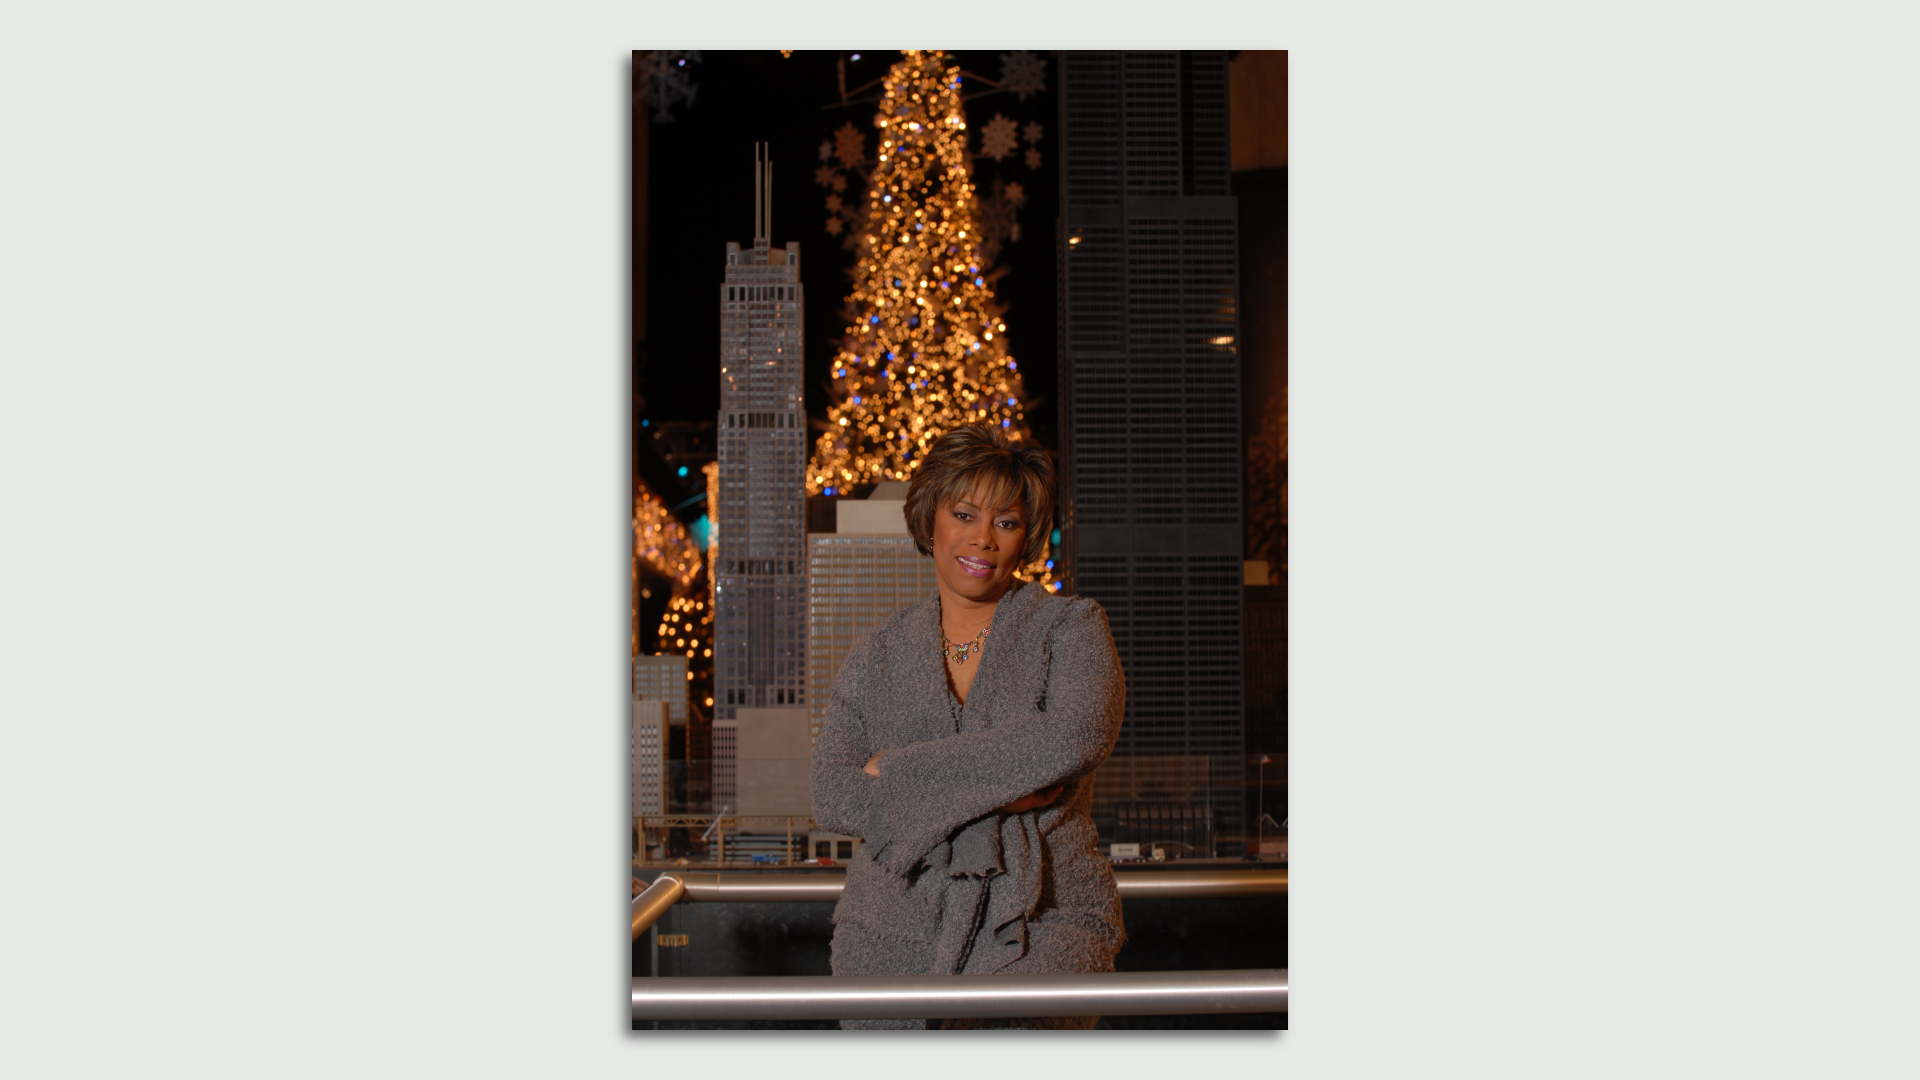 Photo of a woman standing in front of a Christmas tree